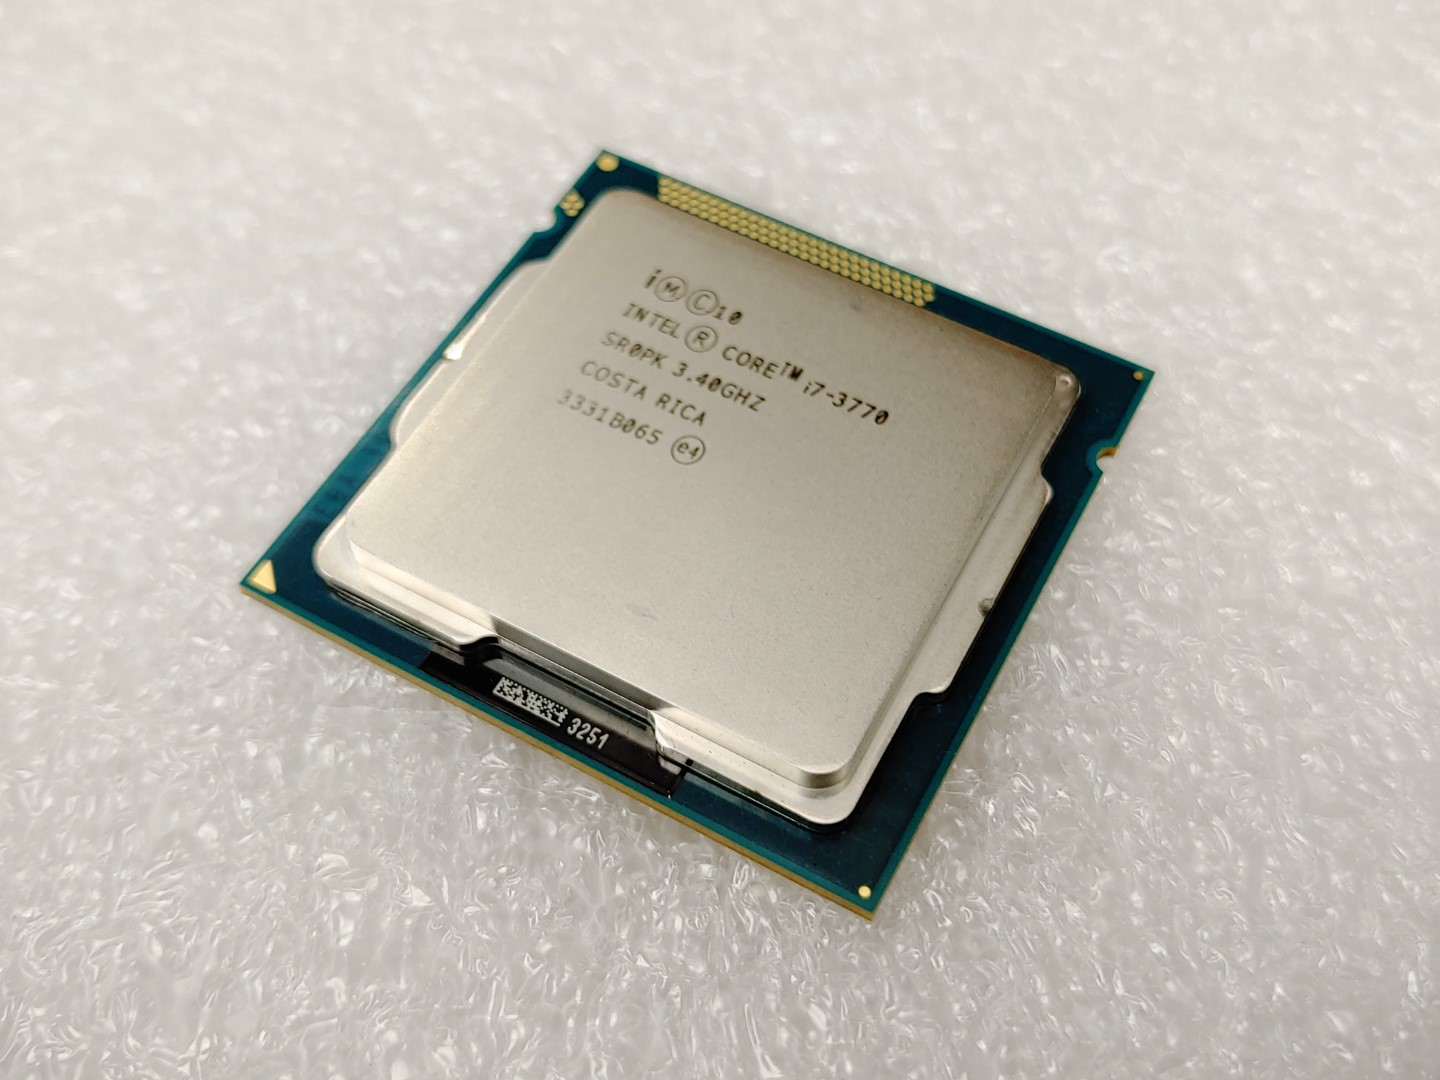 Excellent condition! Tested and pulled from a working environment! Item Specifics: MPN : SR0PKUPC : N/ABrand : IntelProcessor Type : Core i7 3rd GenNumber of Cores : 4Socket Type : LGA 1155/Socket H2Clock Speed : 3.40 GHzBus Speed : 2500 MHzL2 Cache : 1 MBL3 Cache : 8 MBProcessor Model : Intel Core i7-3770Type : Processor - 2